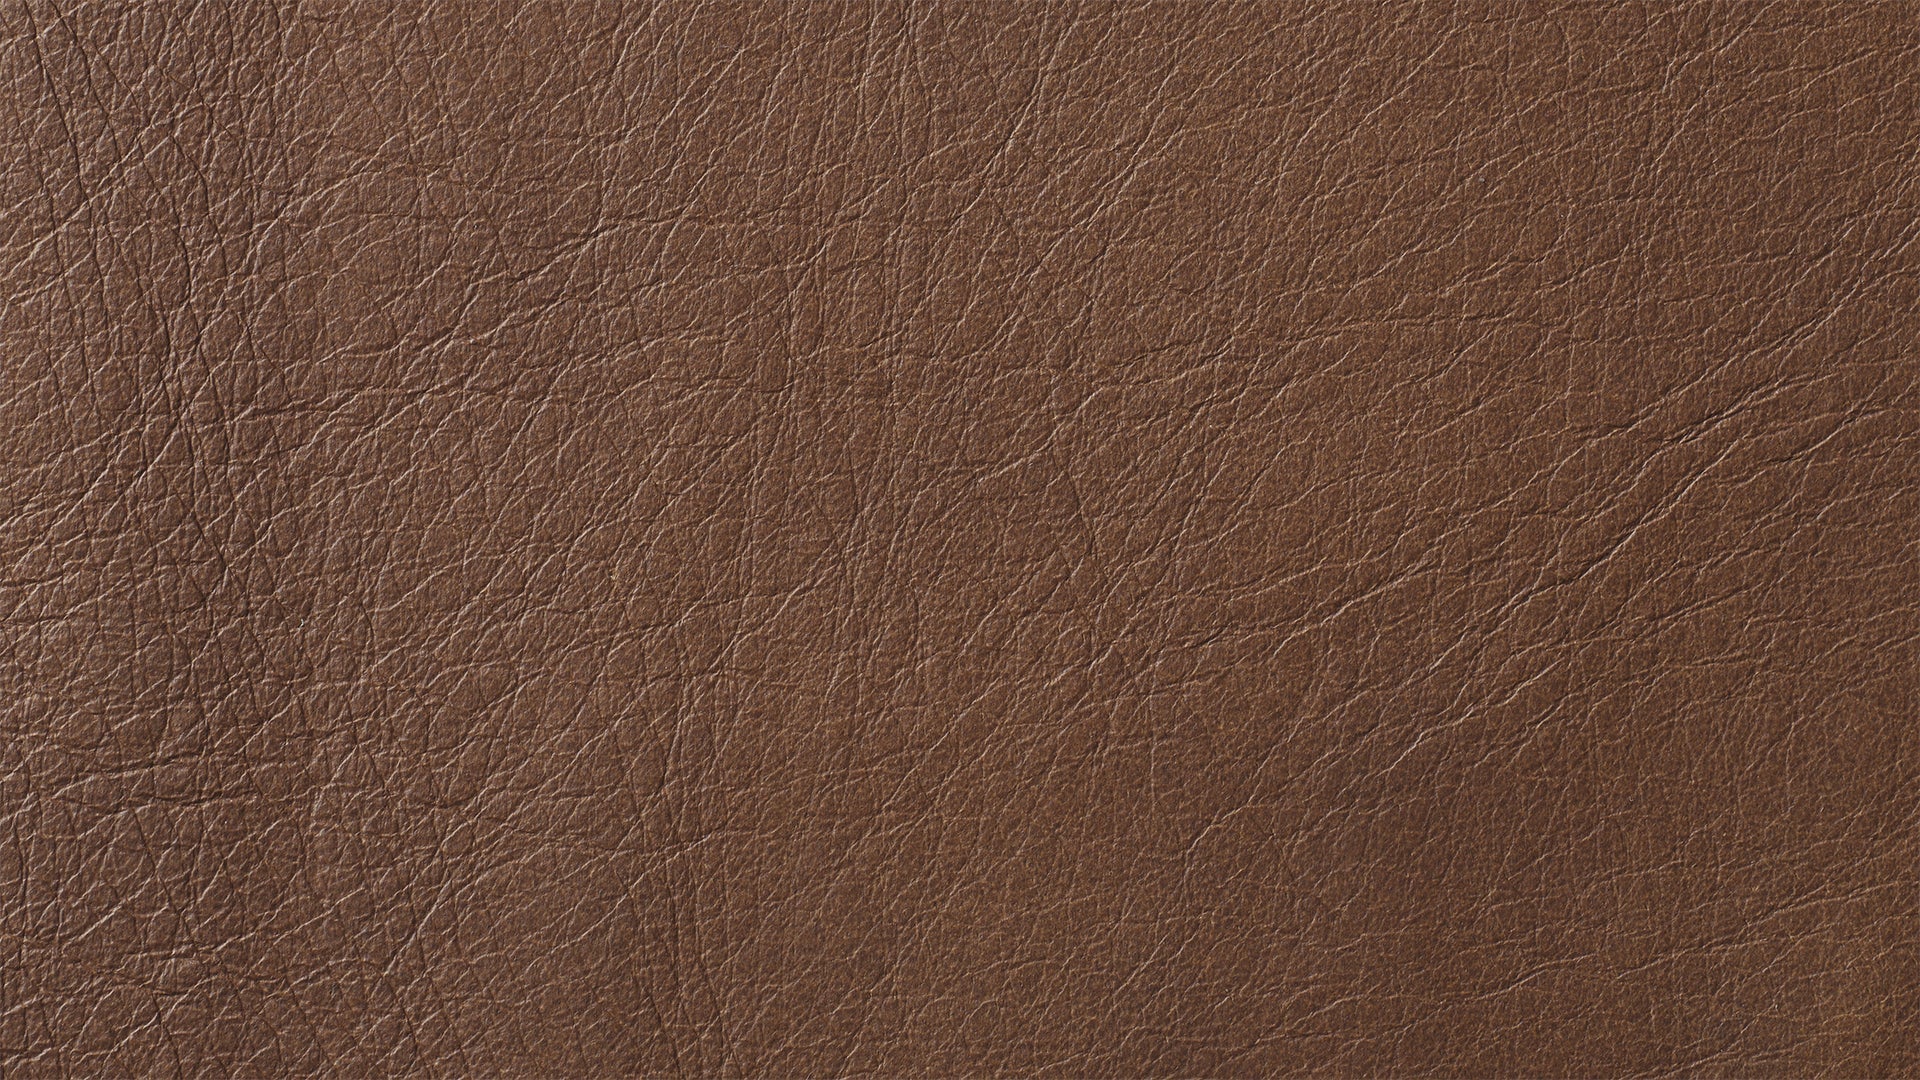 Swatch Rum, Leather - Image 1